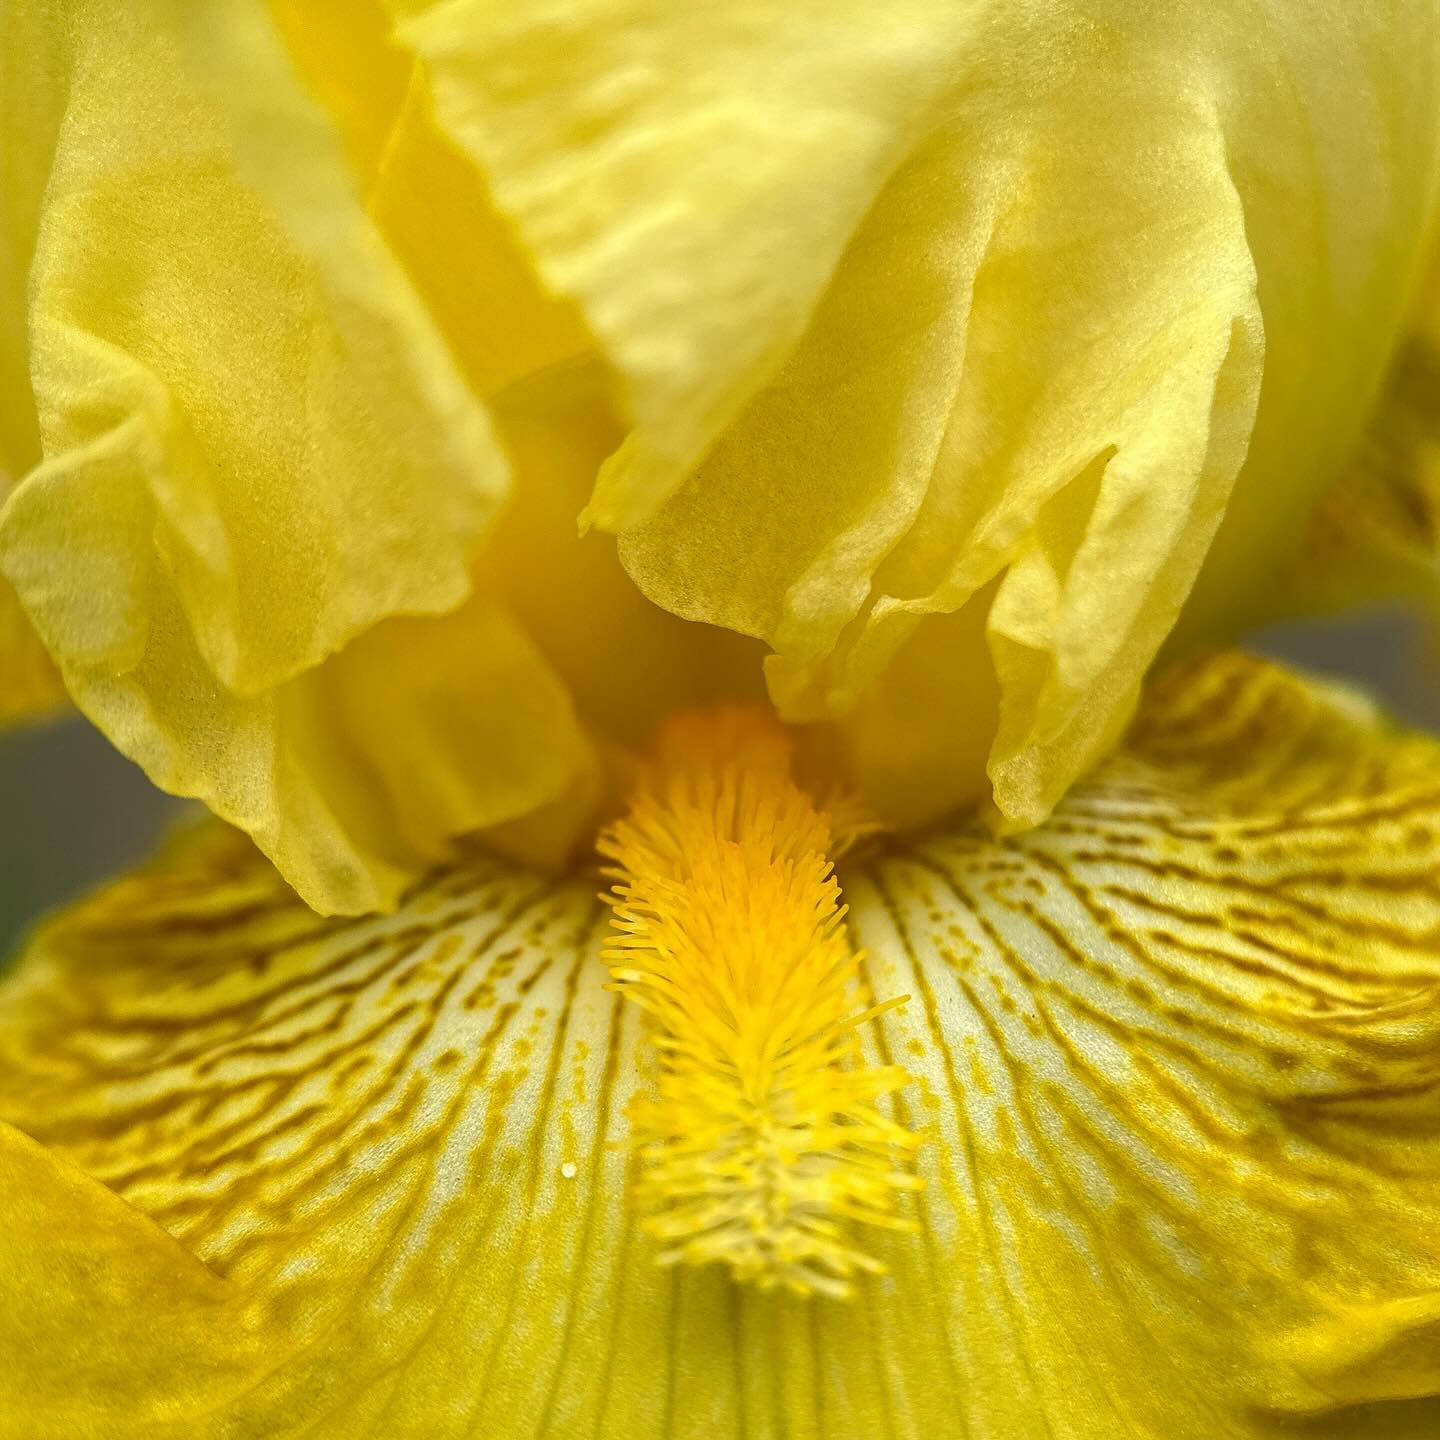 A gift from the yellow iris ~ 

#yellow #golden #iris #gifts